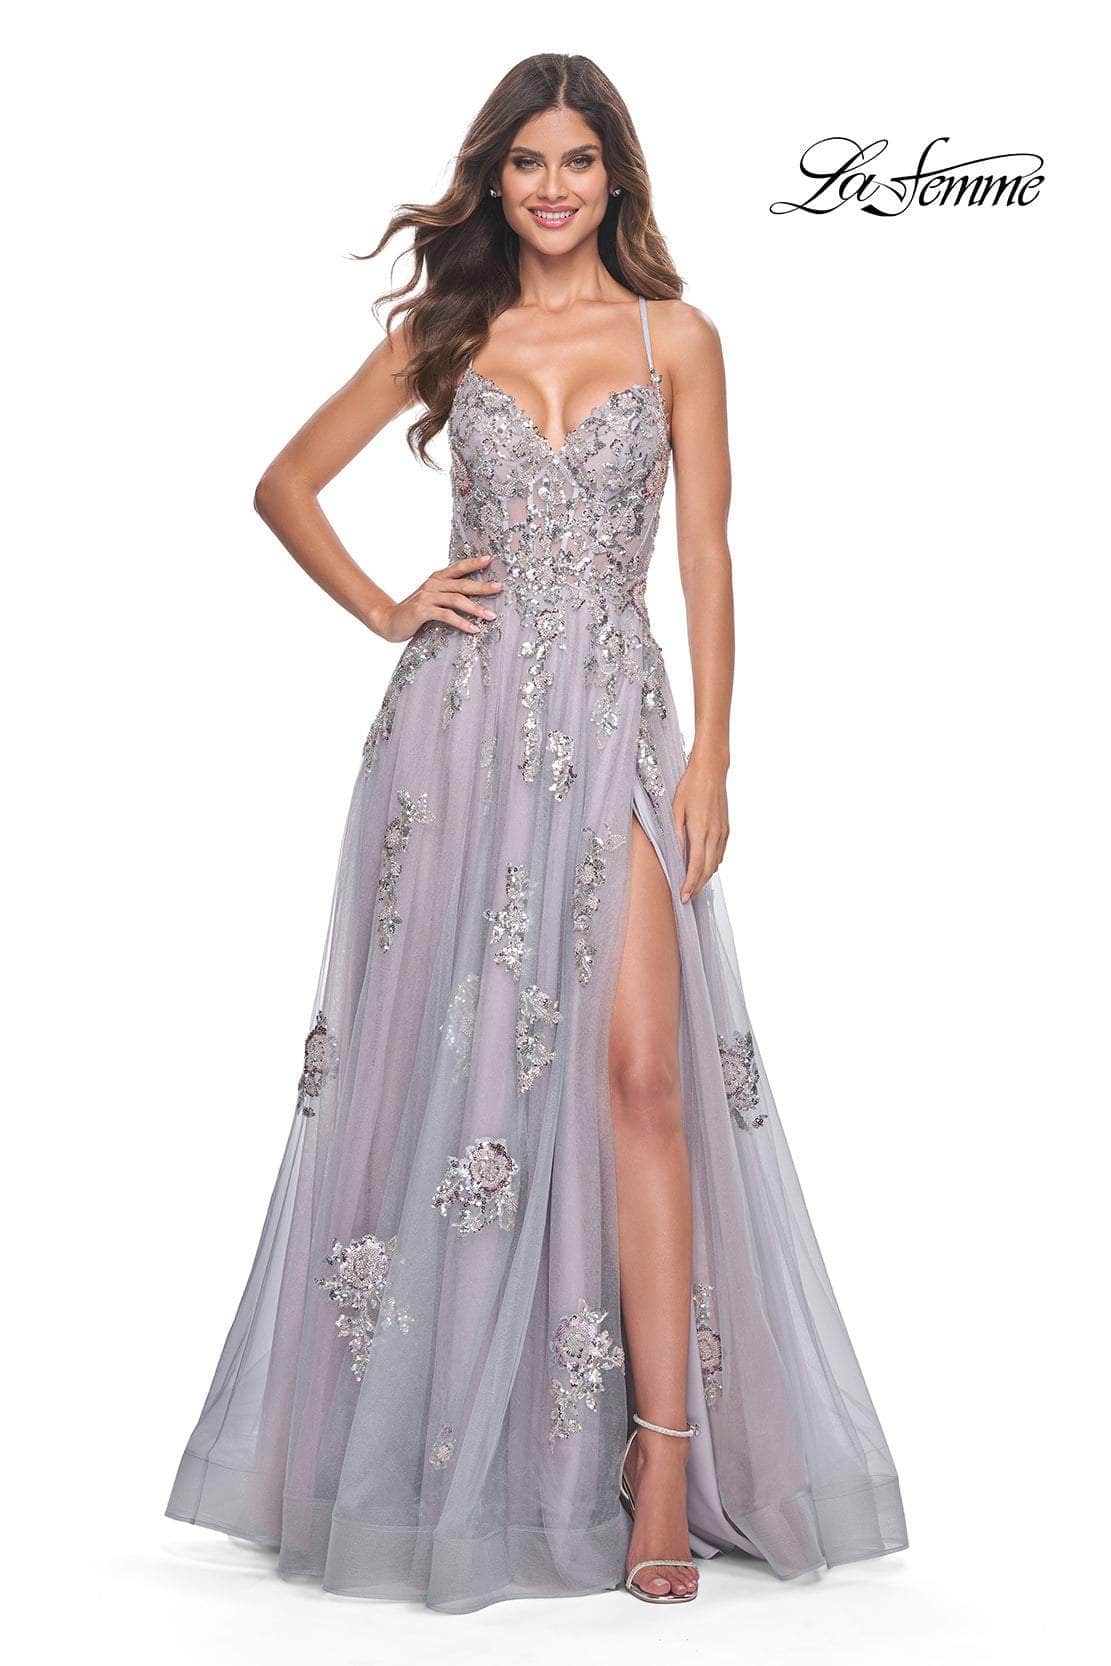 La Femme 32200 - Sequin Embellished Sleeveless Prom Gown
